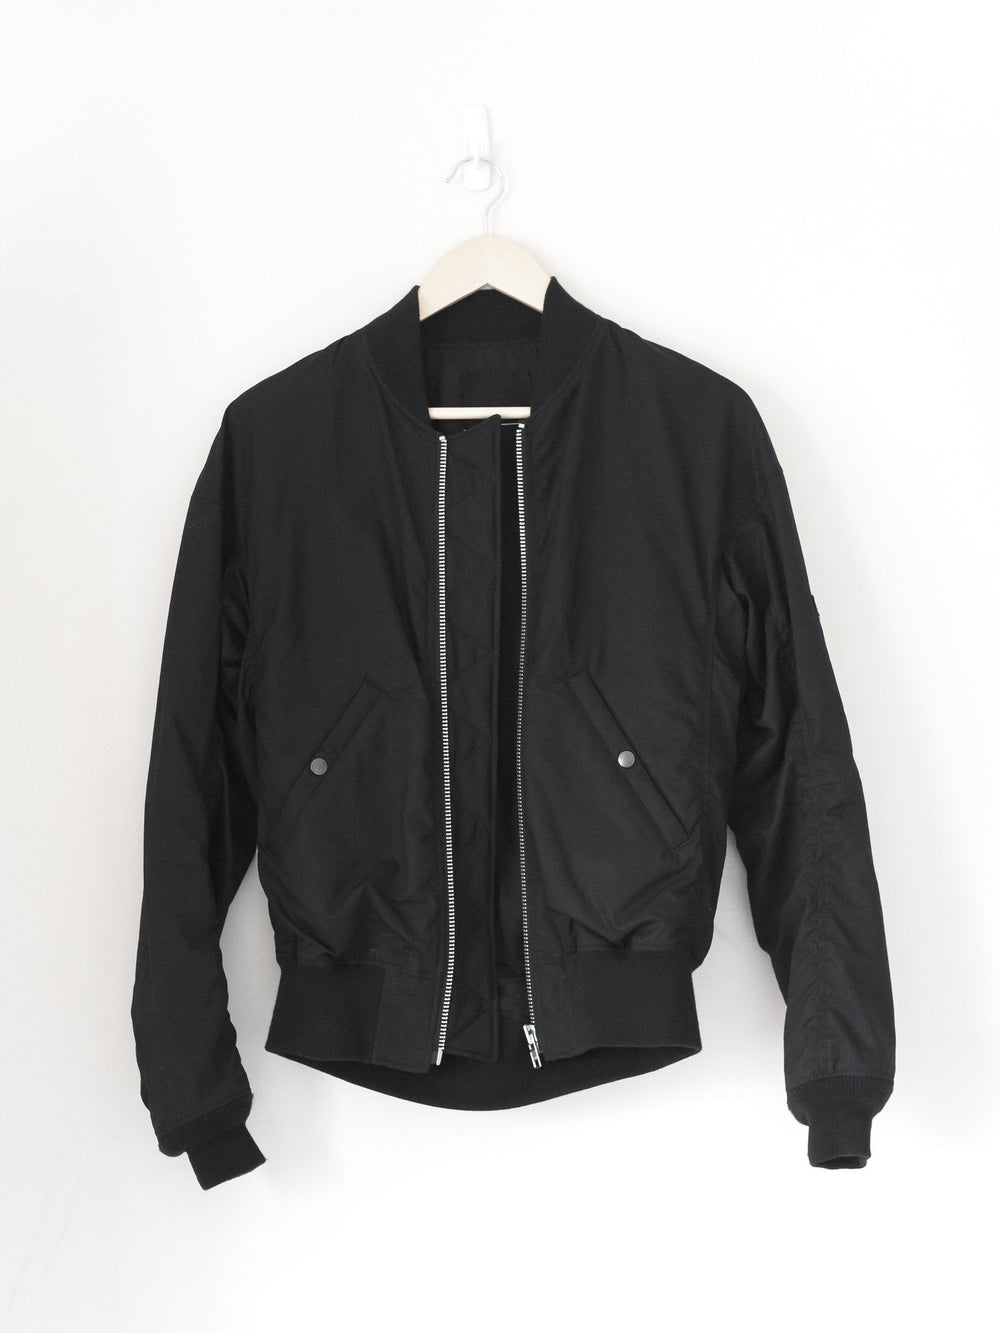 Lad Musician SS10 MA-1 Bomber